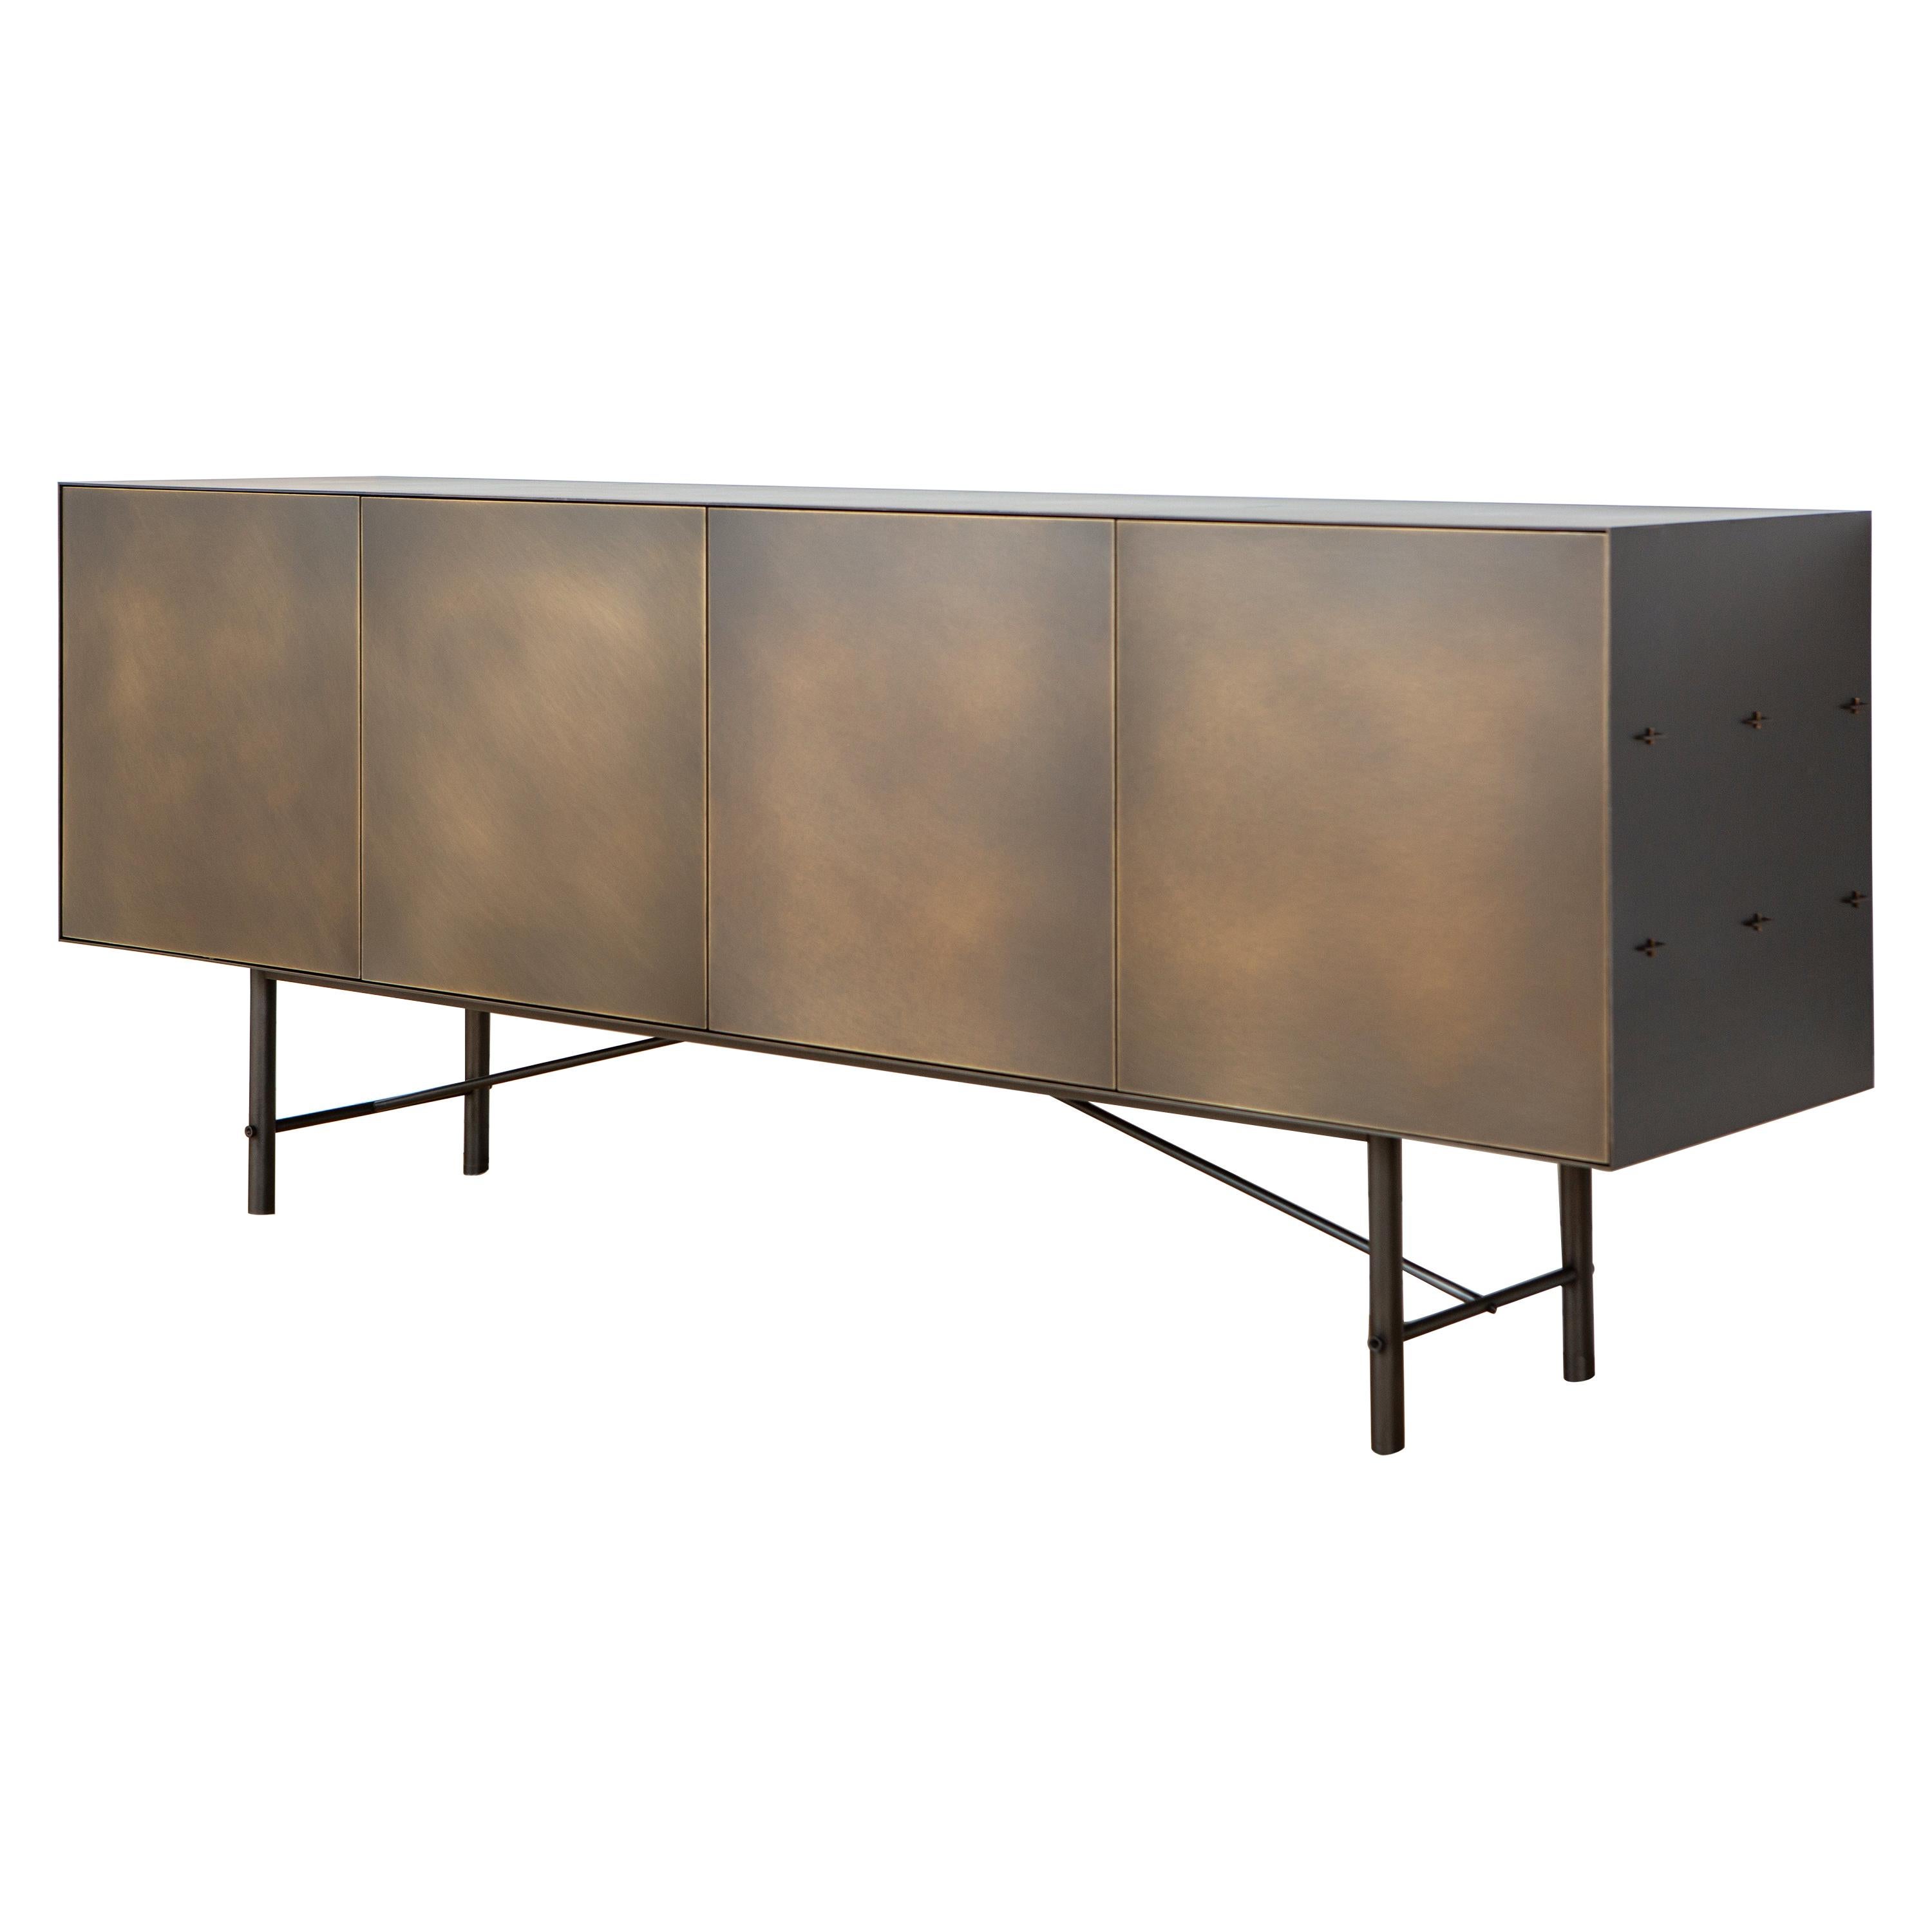 The Connect Credenza is designed to express the process by which each piece is created, with visible construction and fastening details that are integral to the final piece. Traditional joinery techniques are used in conjunction with mass